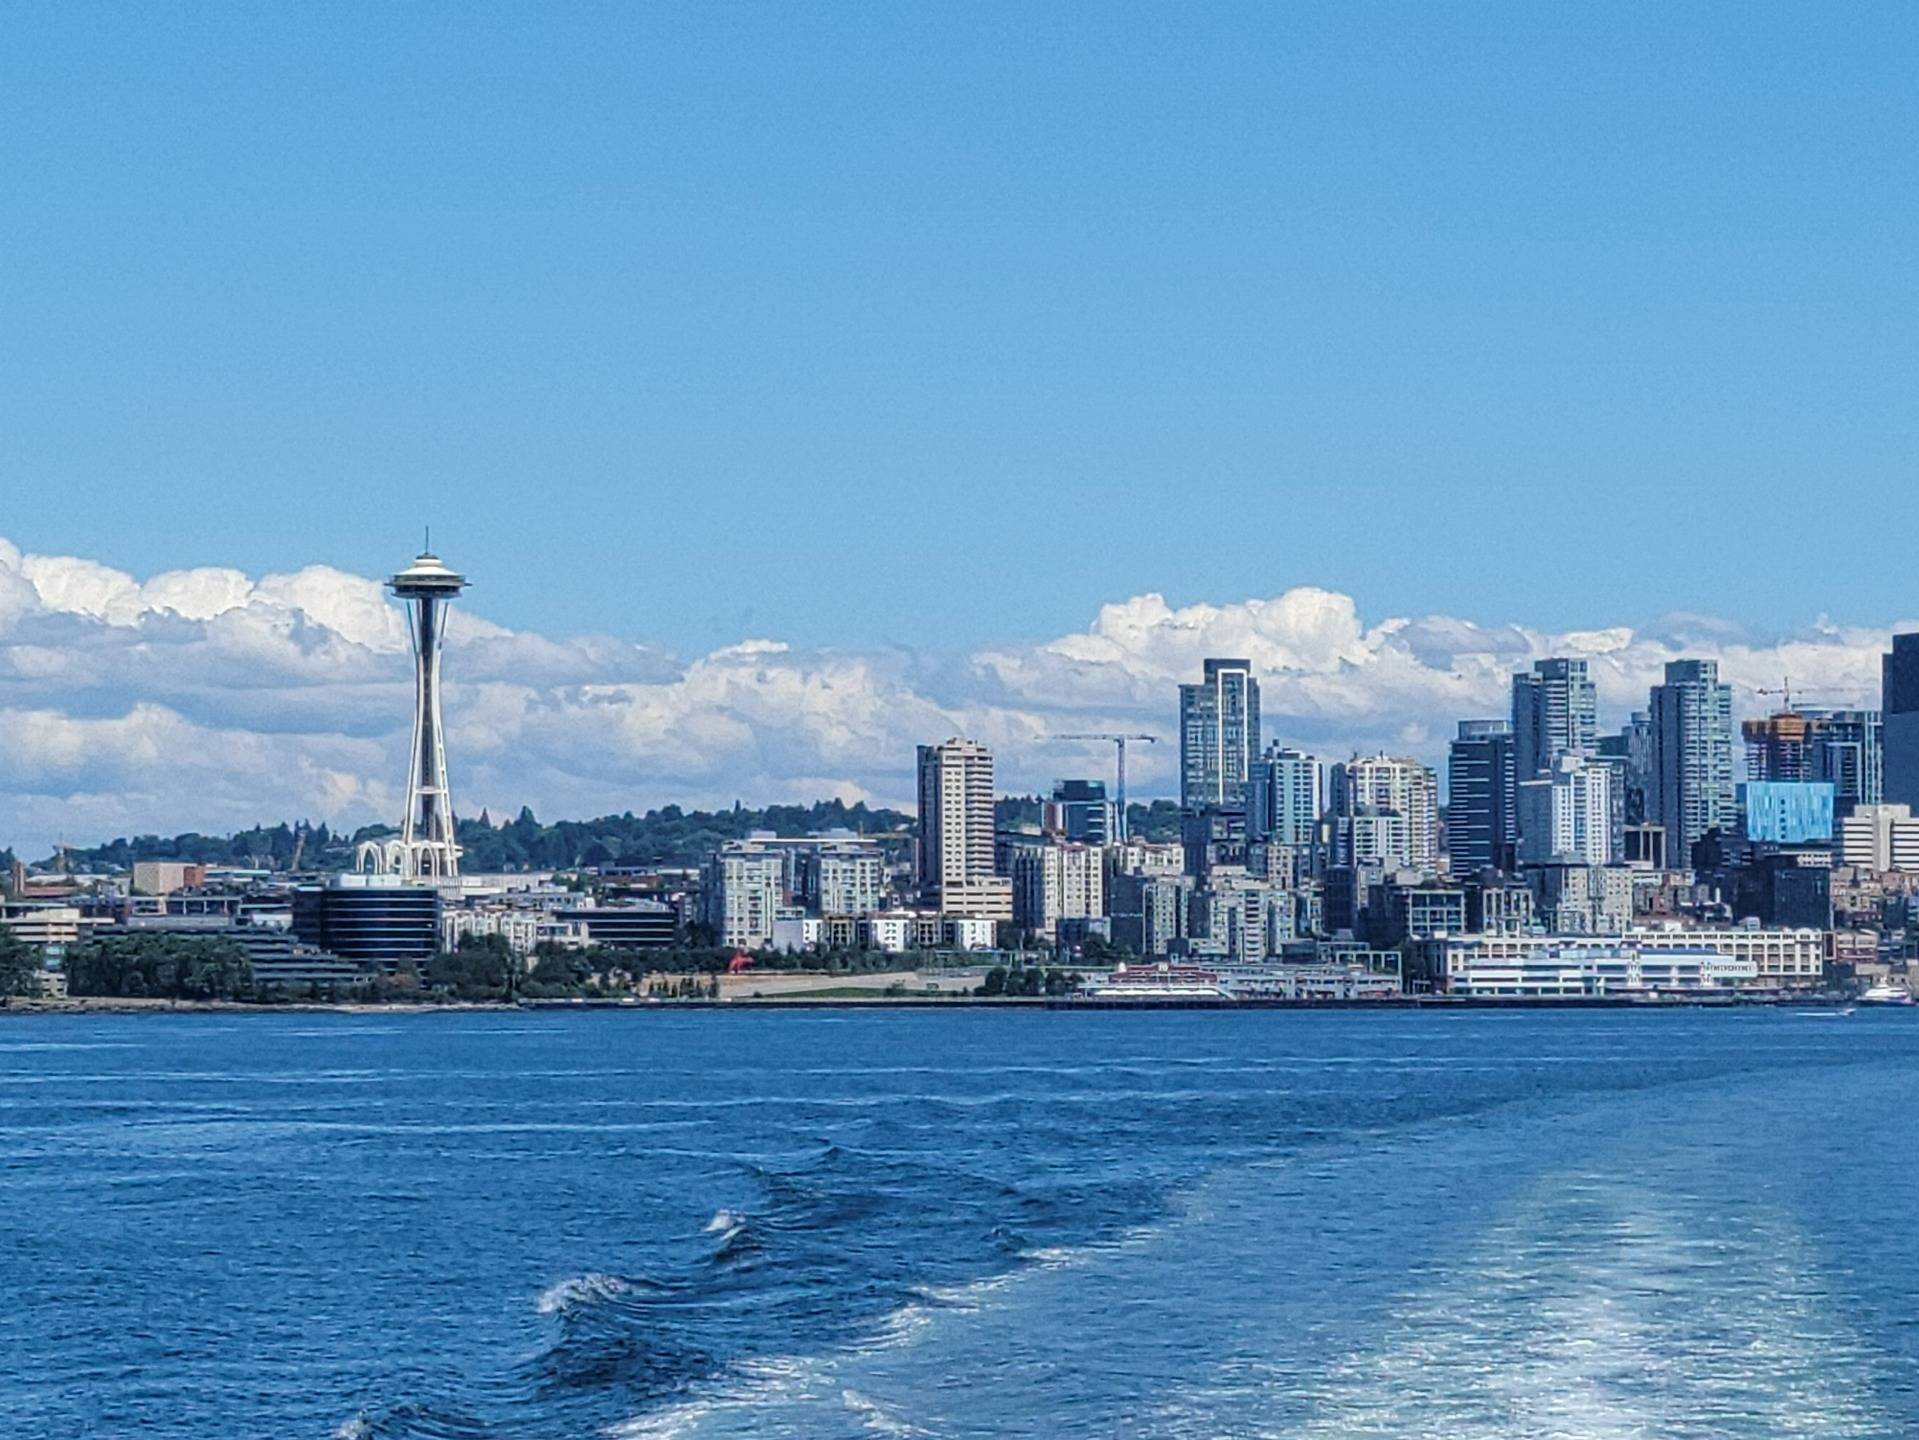 Sleepless in Seattle - Because There's So Much to Do!